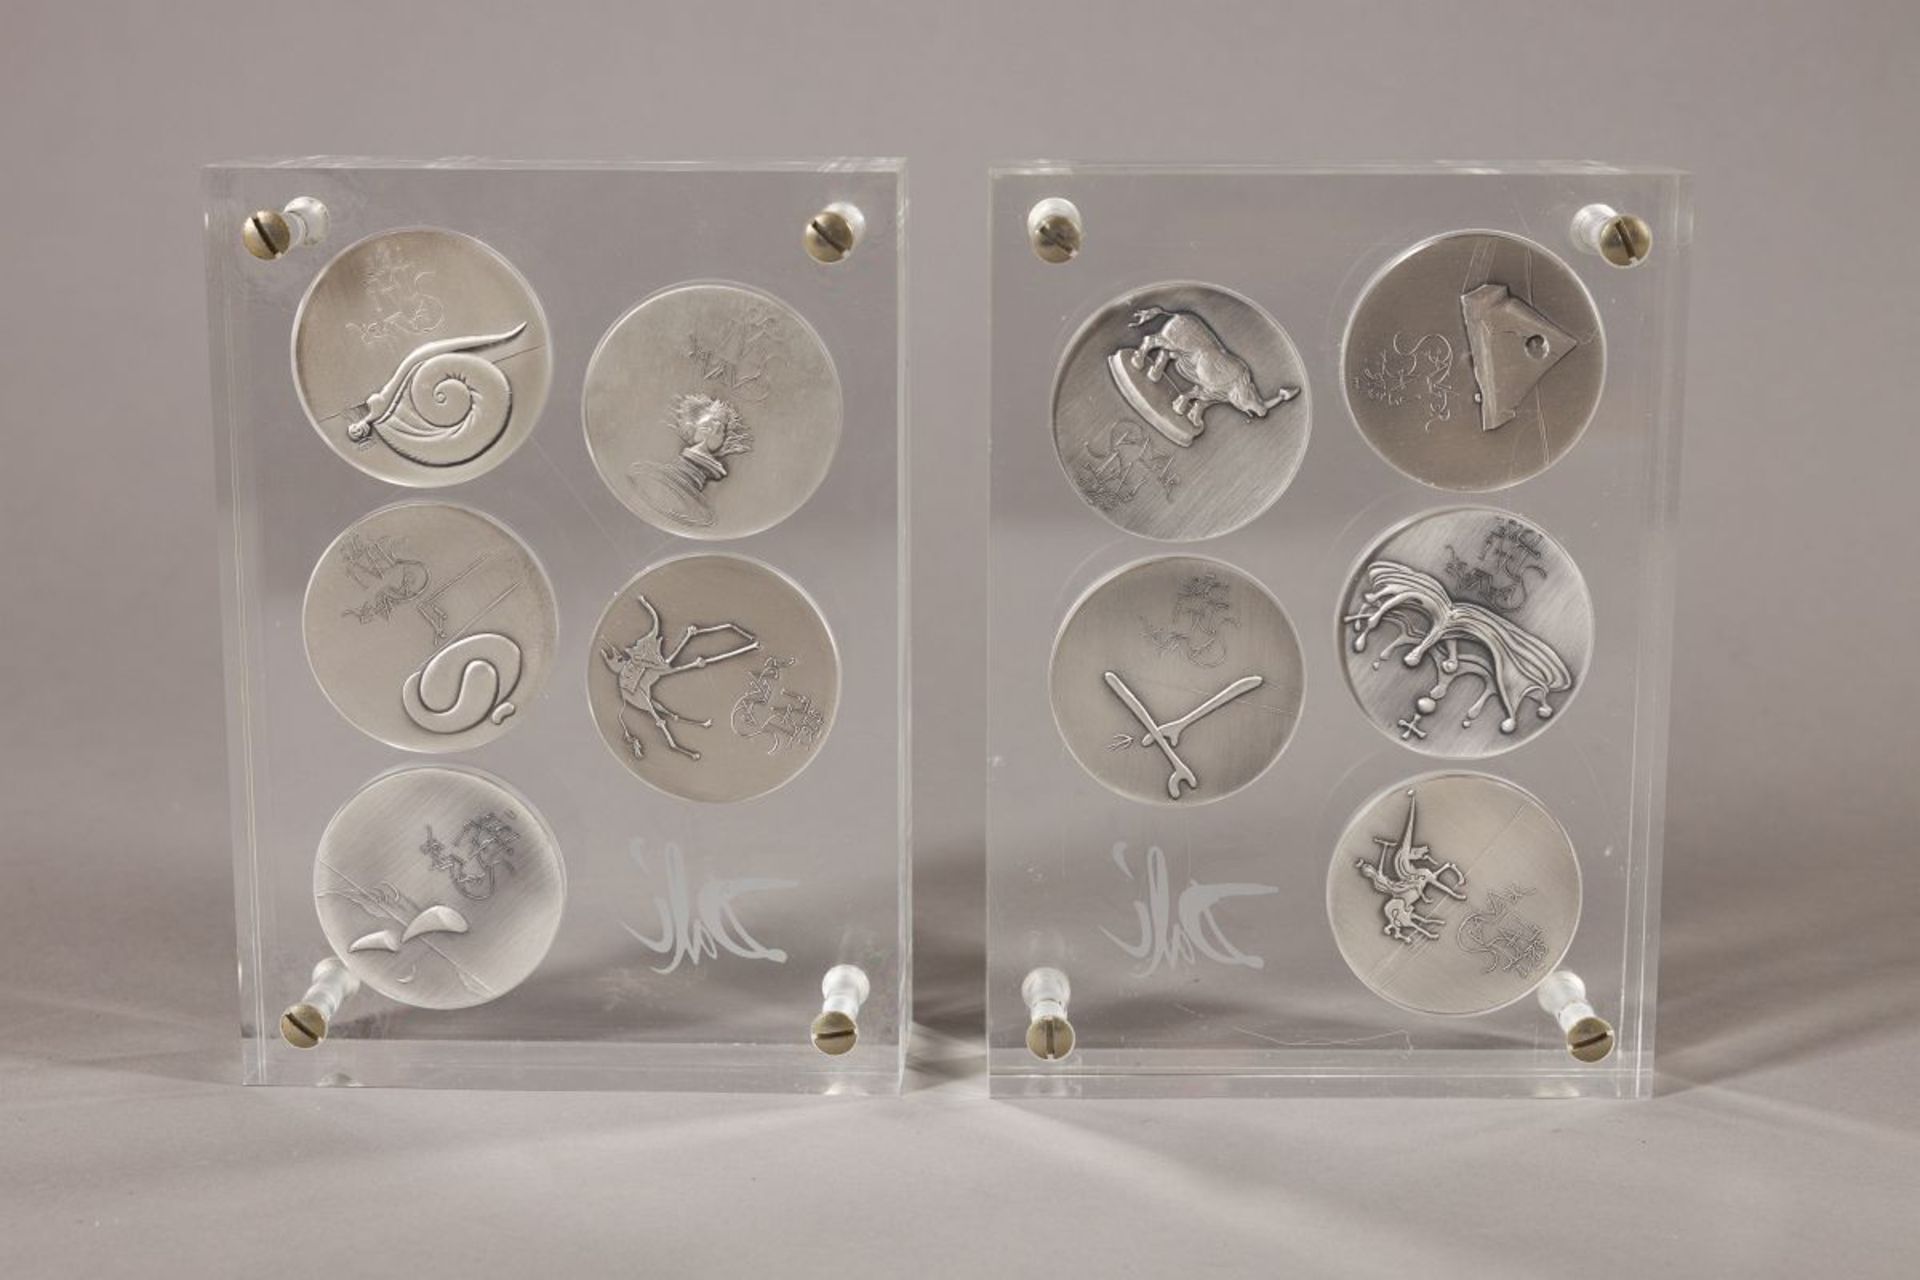 Dalí, Salvador(1904 - 1989)Ten Commandments, 1975each 5 silvermedals in acrylic glasseach - Image 2 of 14